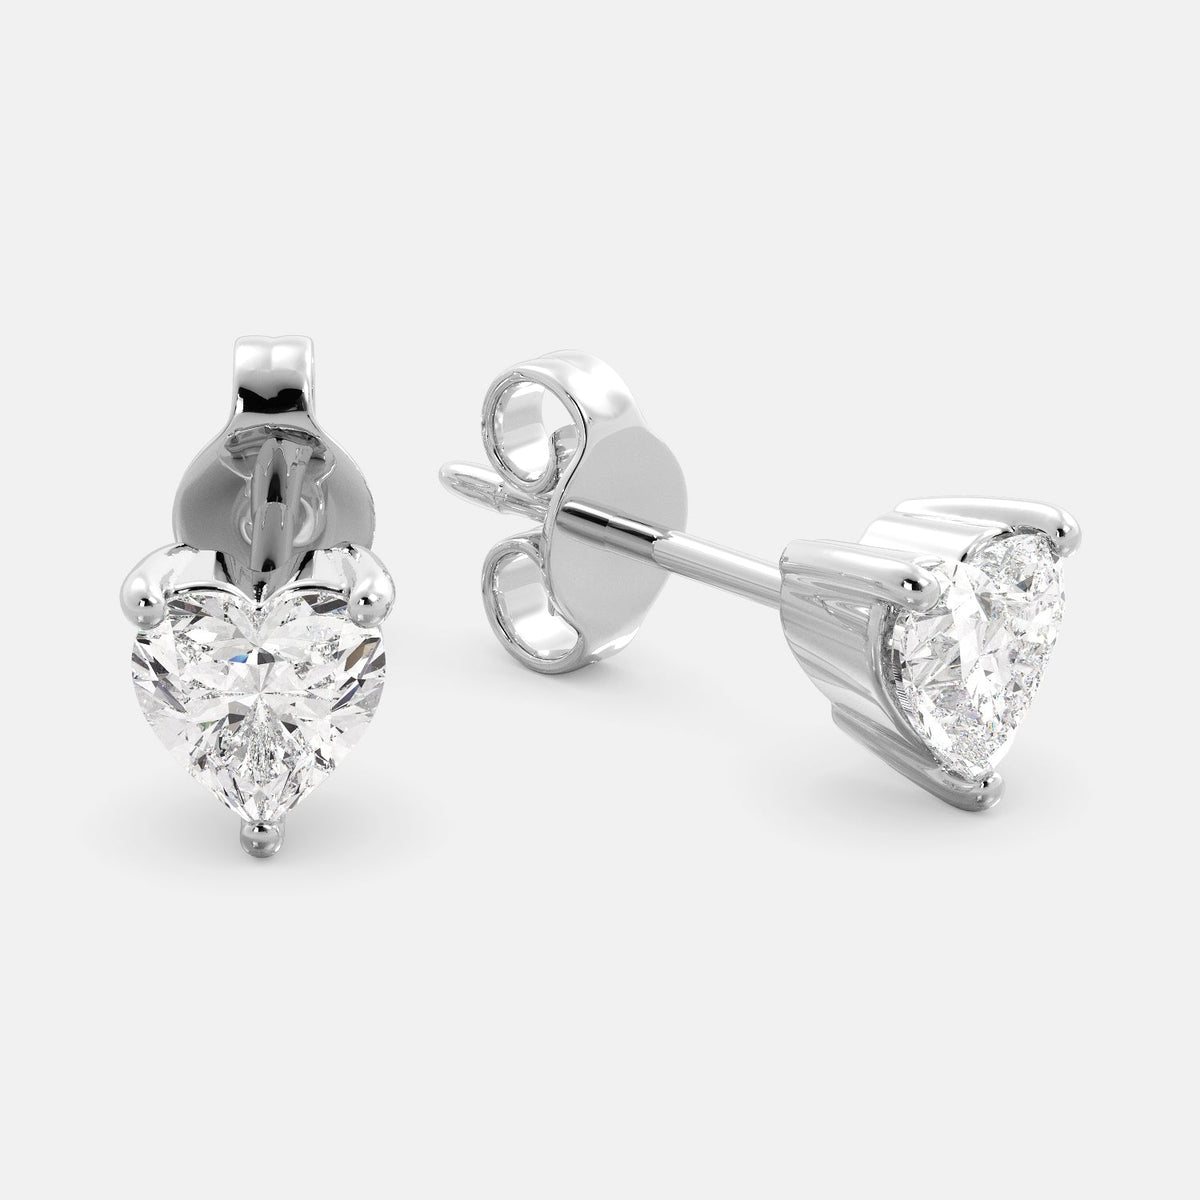 A close-up of a pair of heart-shaped diamond stud earrings in recycled white gold. Each earring is set with a single heart shape diamond in the center. The earrings are made of recycled white gold and have a simple, elegant design. The diamonds are sparkling and reflect light beautifully. The earrings are a perfect gift for a loved one or a special occasion.